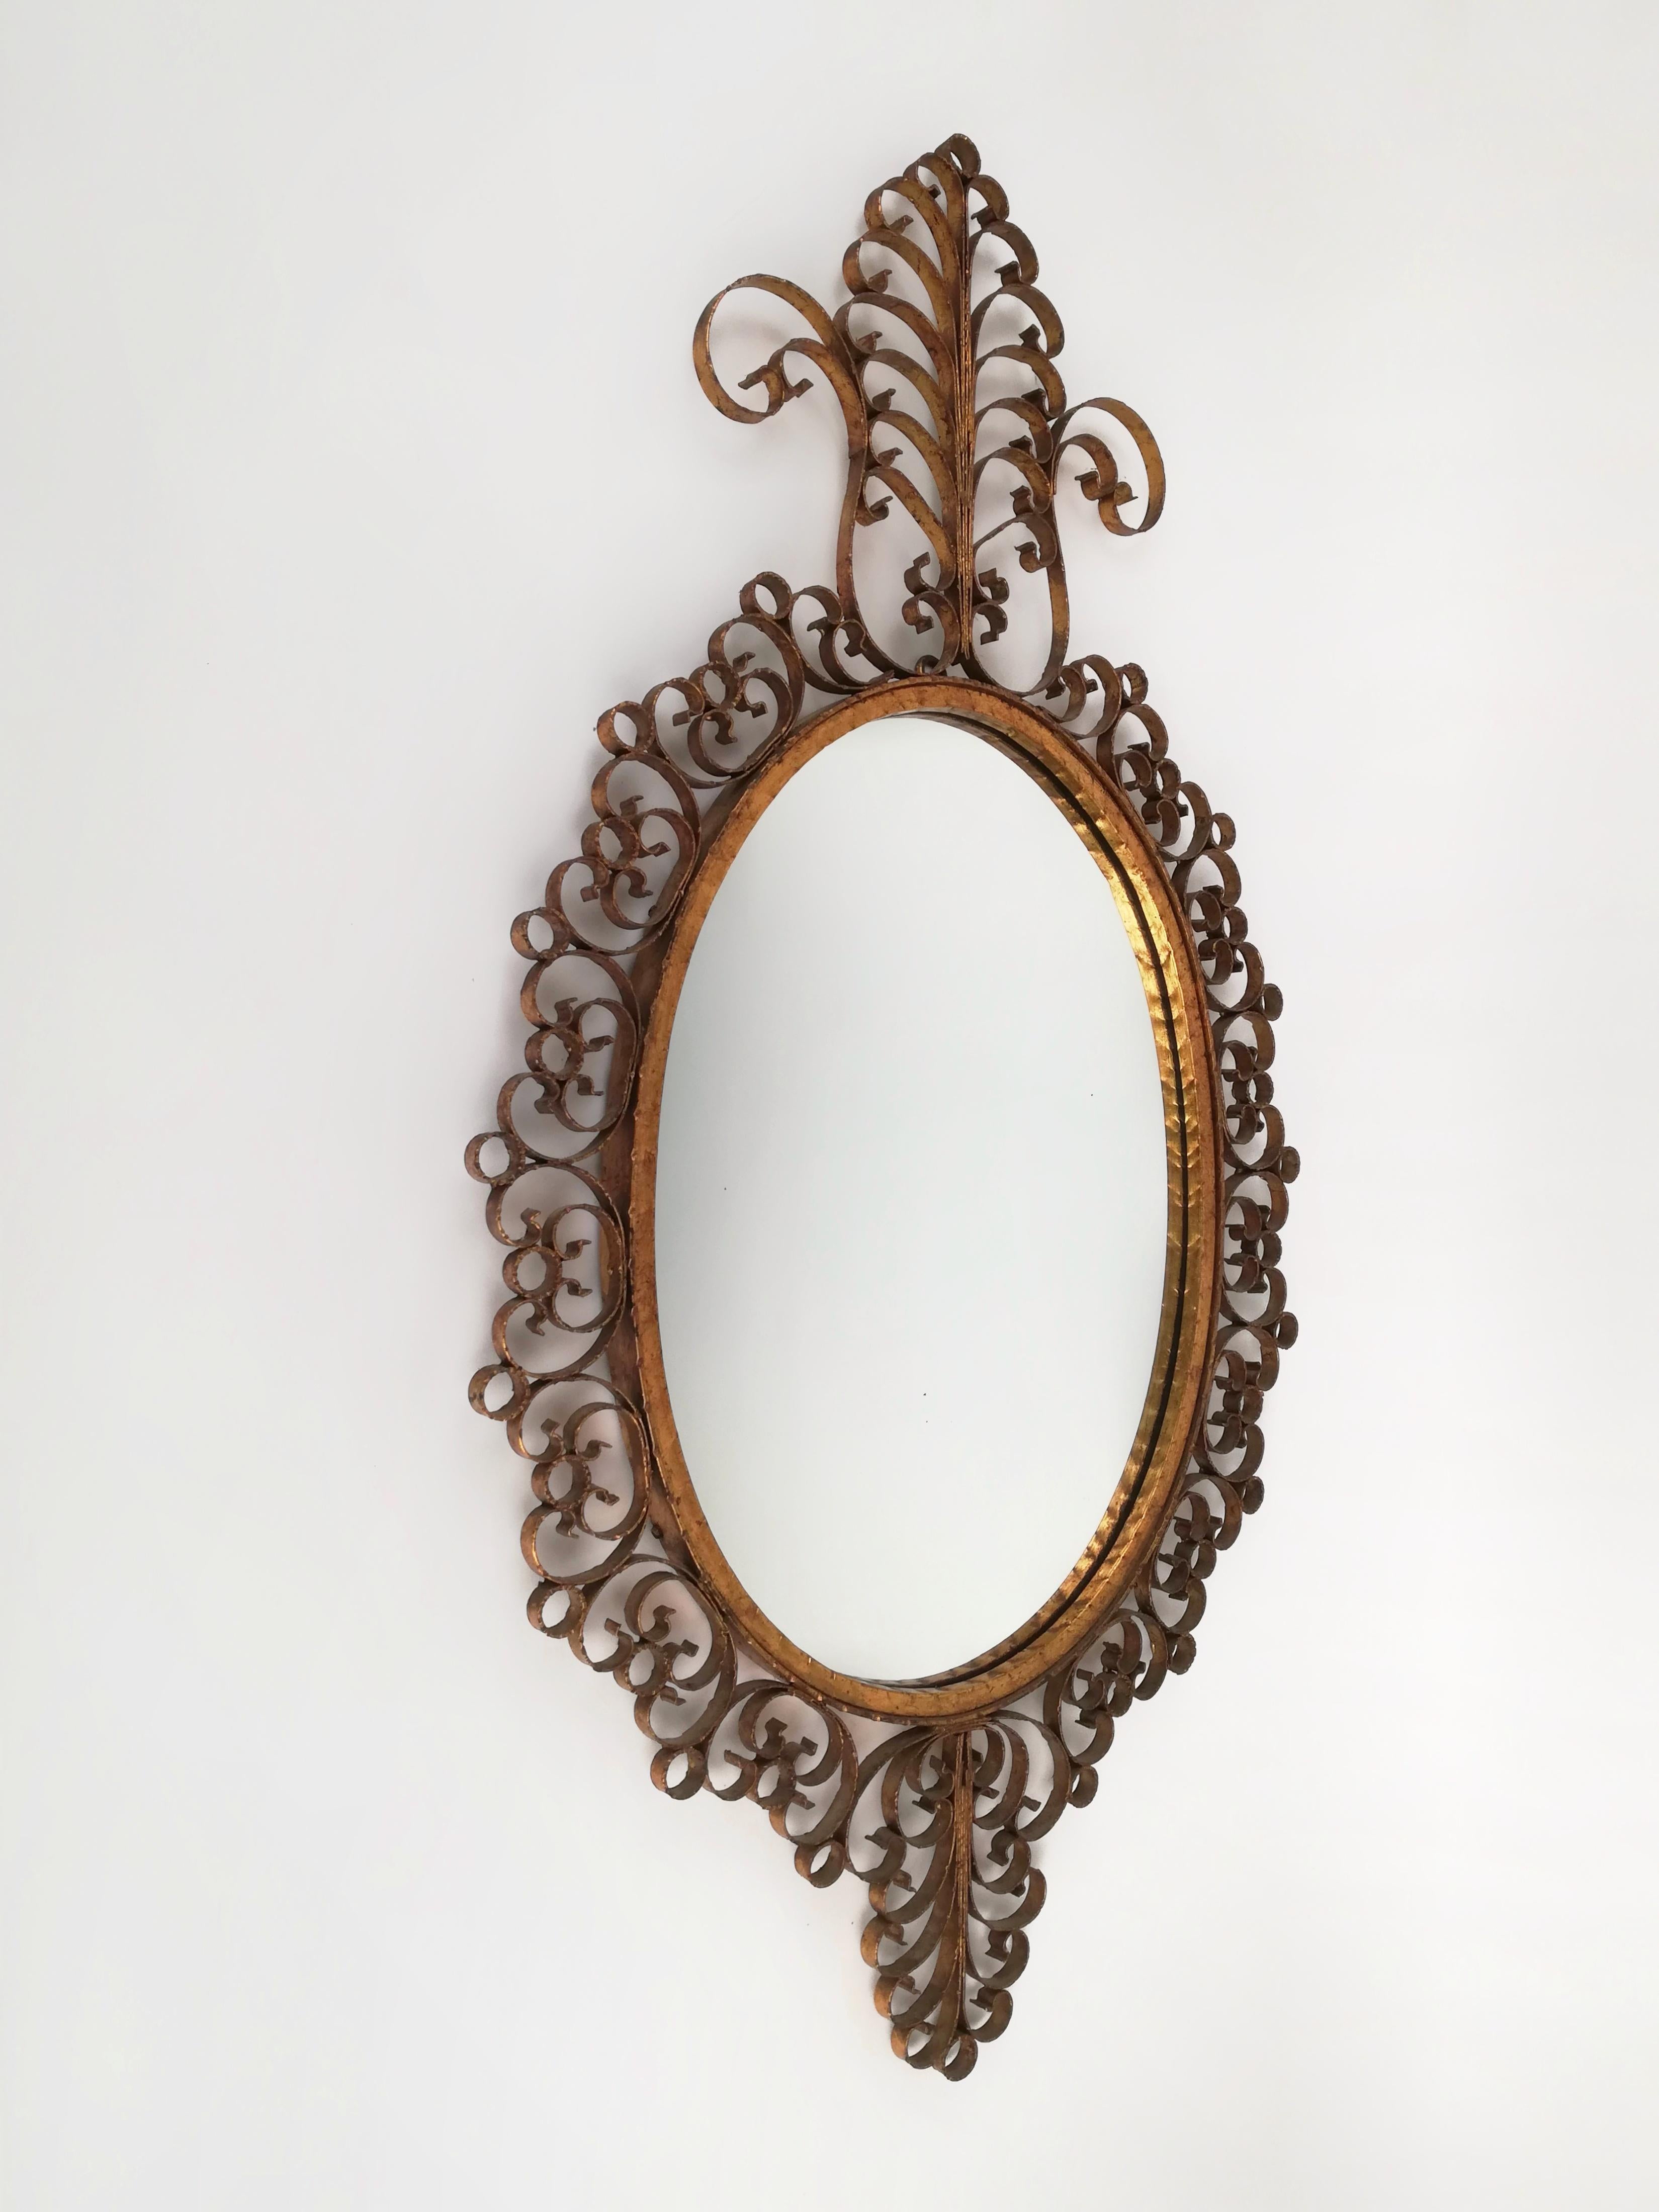 Hammered Wrought Iron Gilded Mirror in the Style of Pierluigi Colli, Italy, 1950 For Sale 7